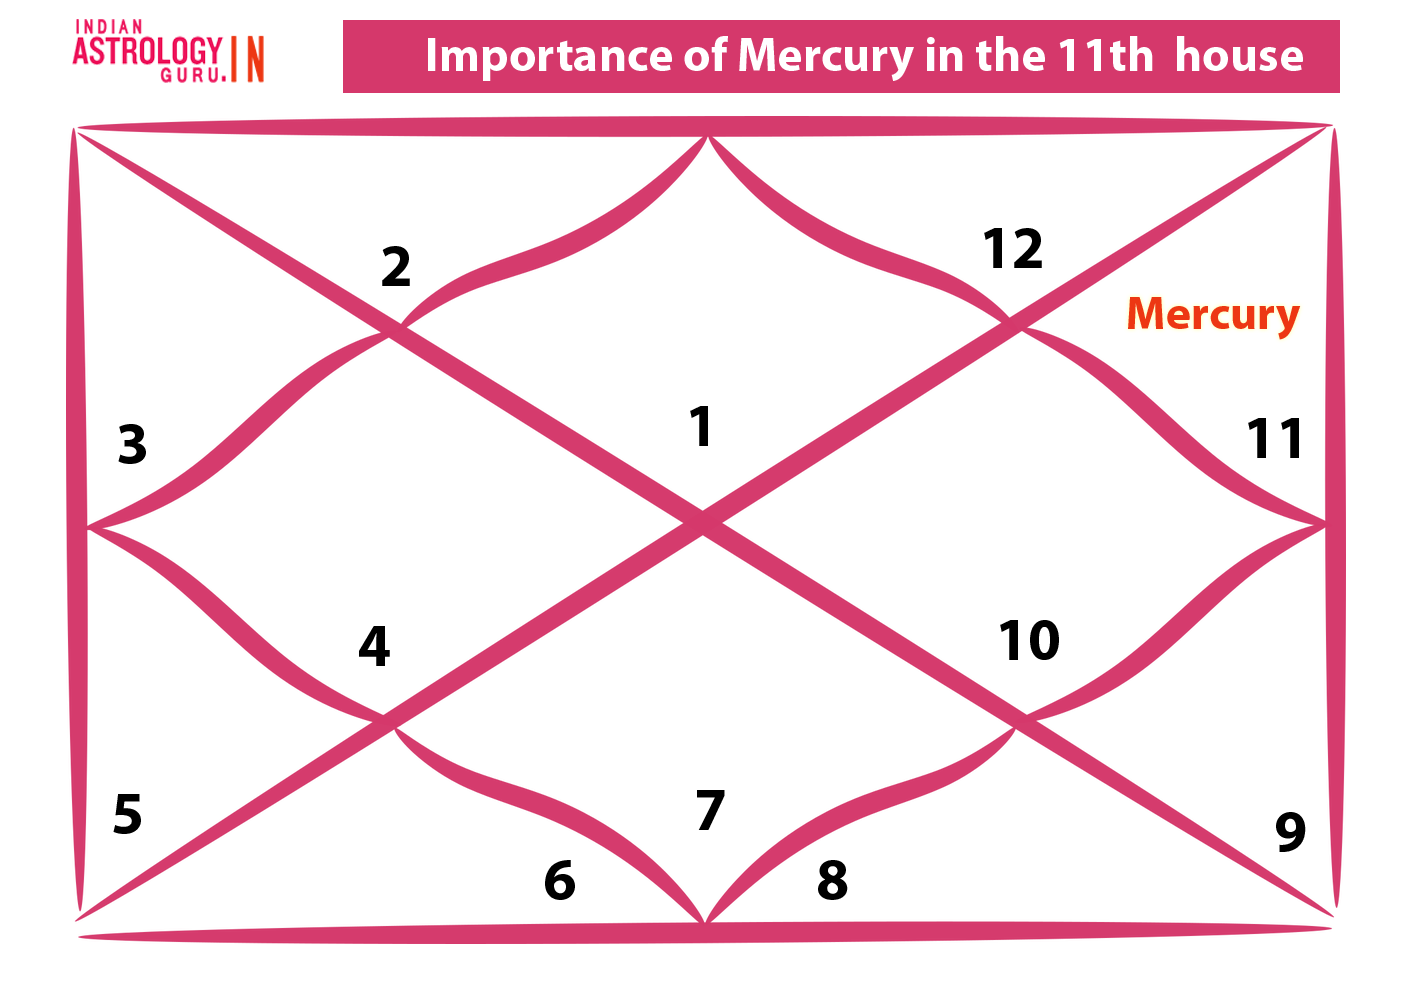 Mercury in the 11th house